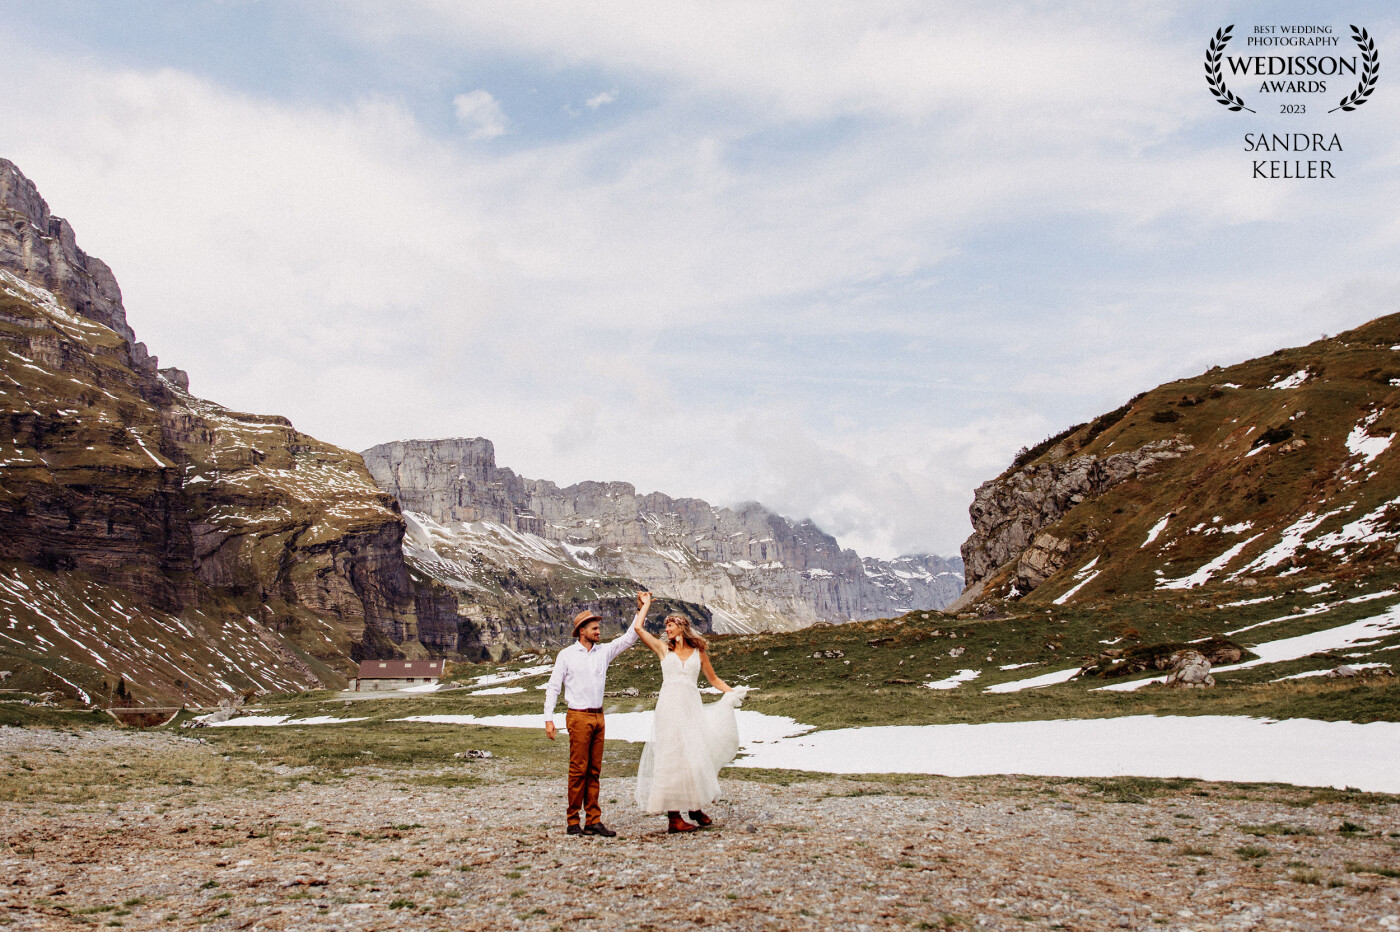 In Switzerland we have many breath taking  sceneries. And this is one of them. Eloping in the mountains, I think is one thing I would do, if I would get married to my hubby again;-)